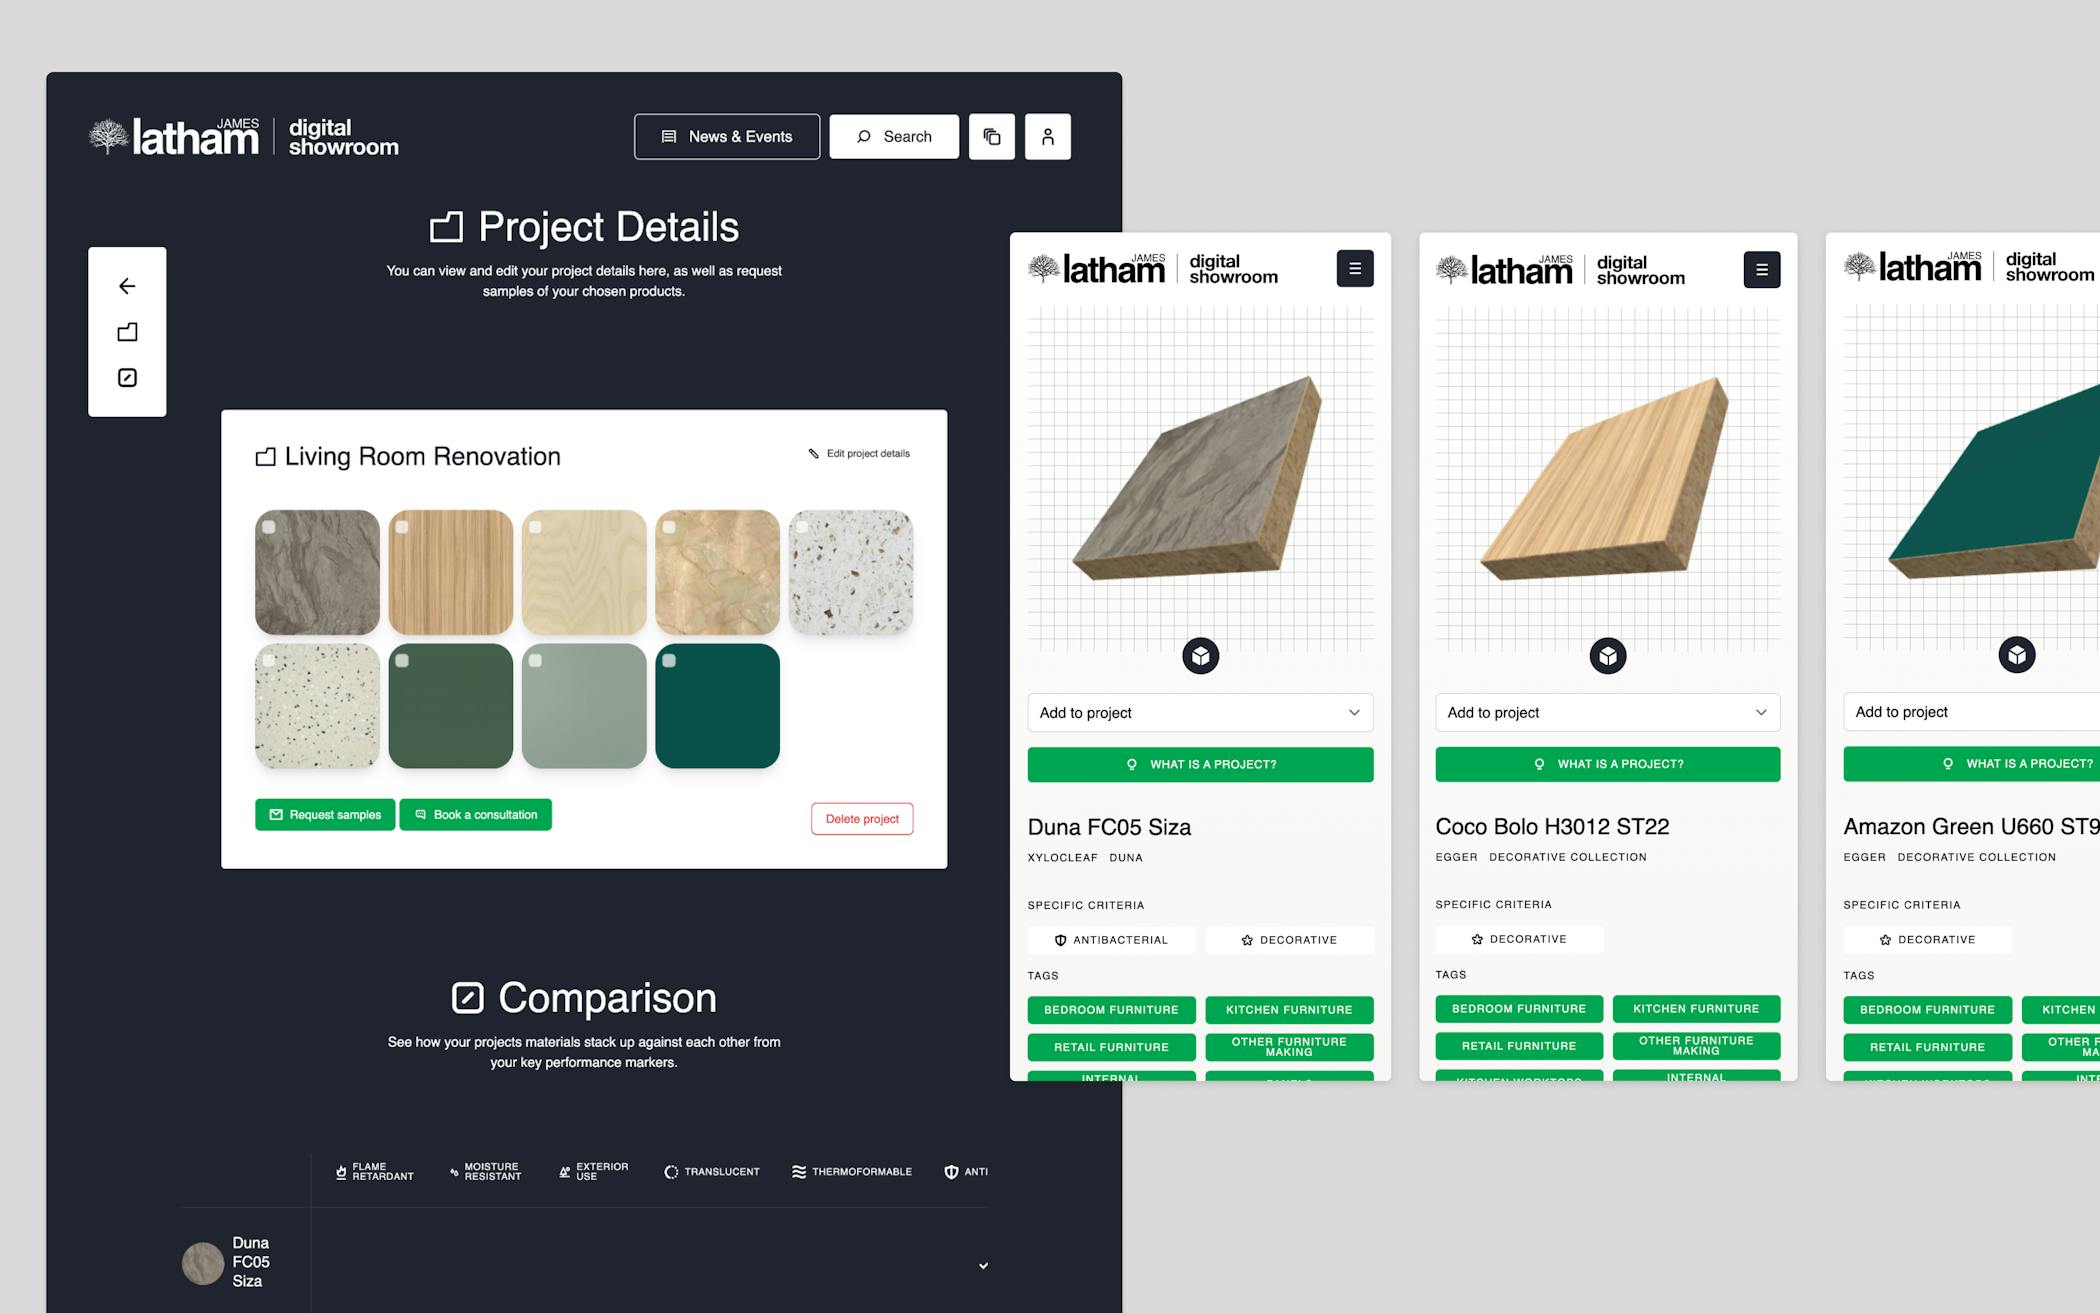 Project details page, showing a shortlist of materials.